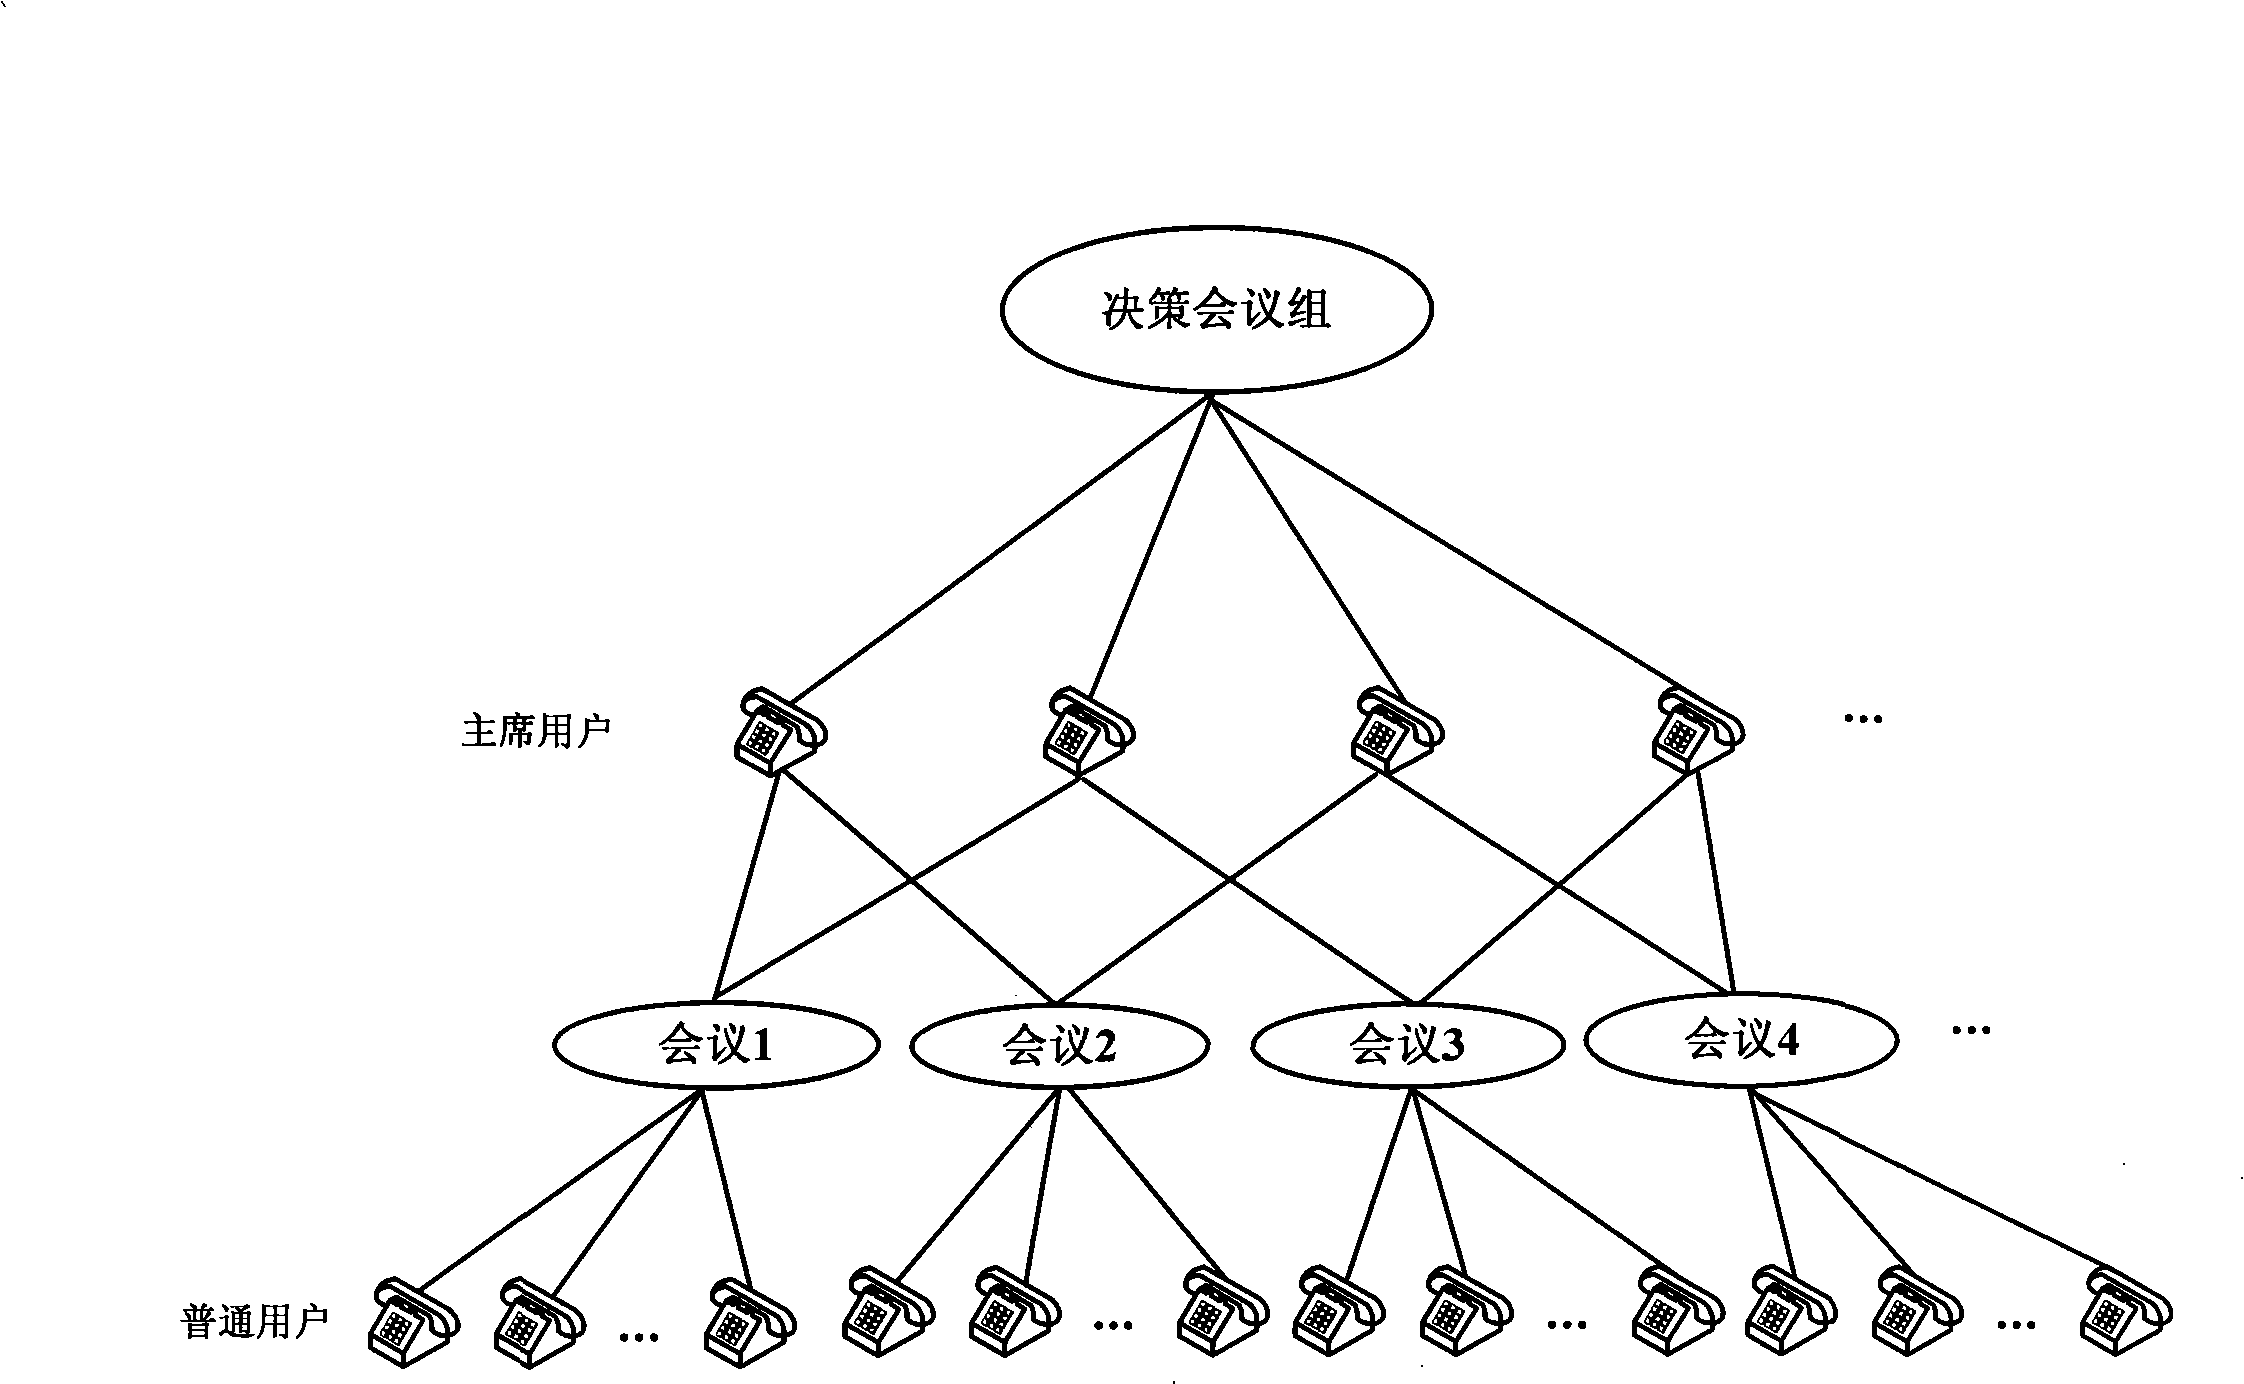 Method for implementing conference scheduling through digital switch